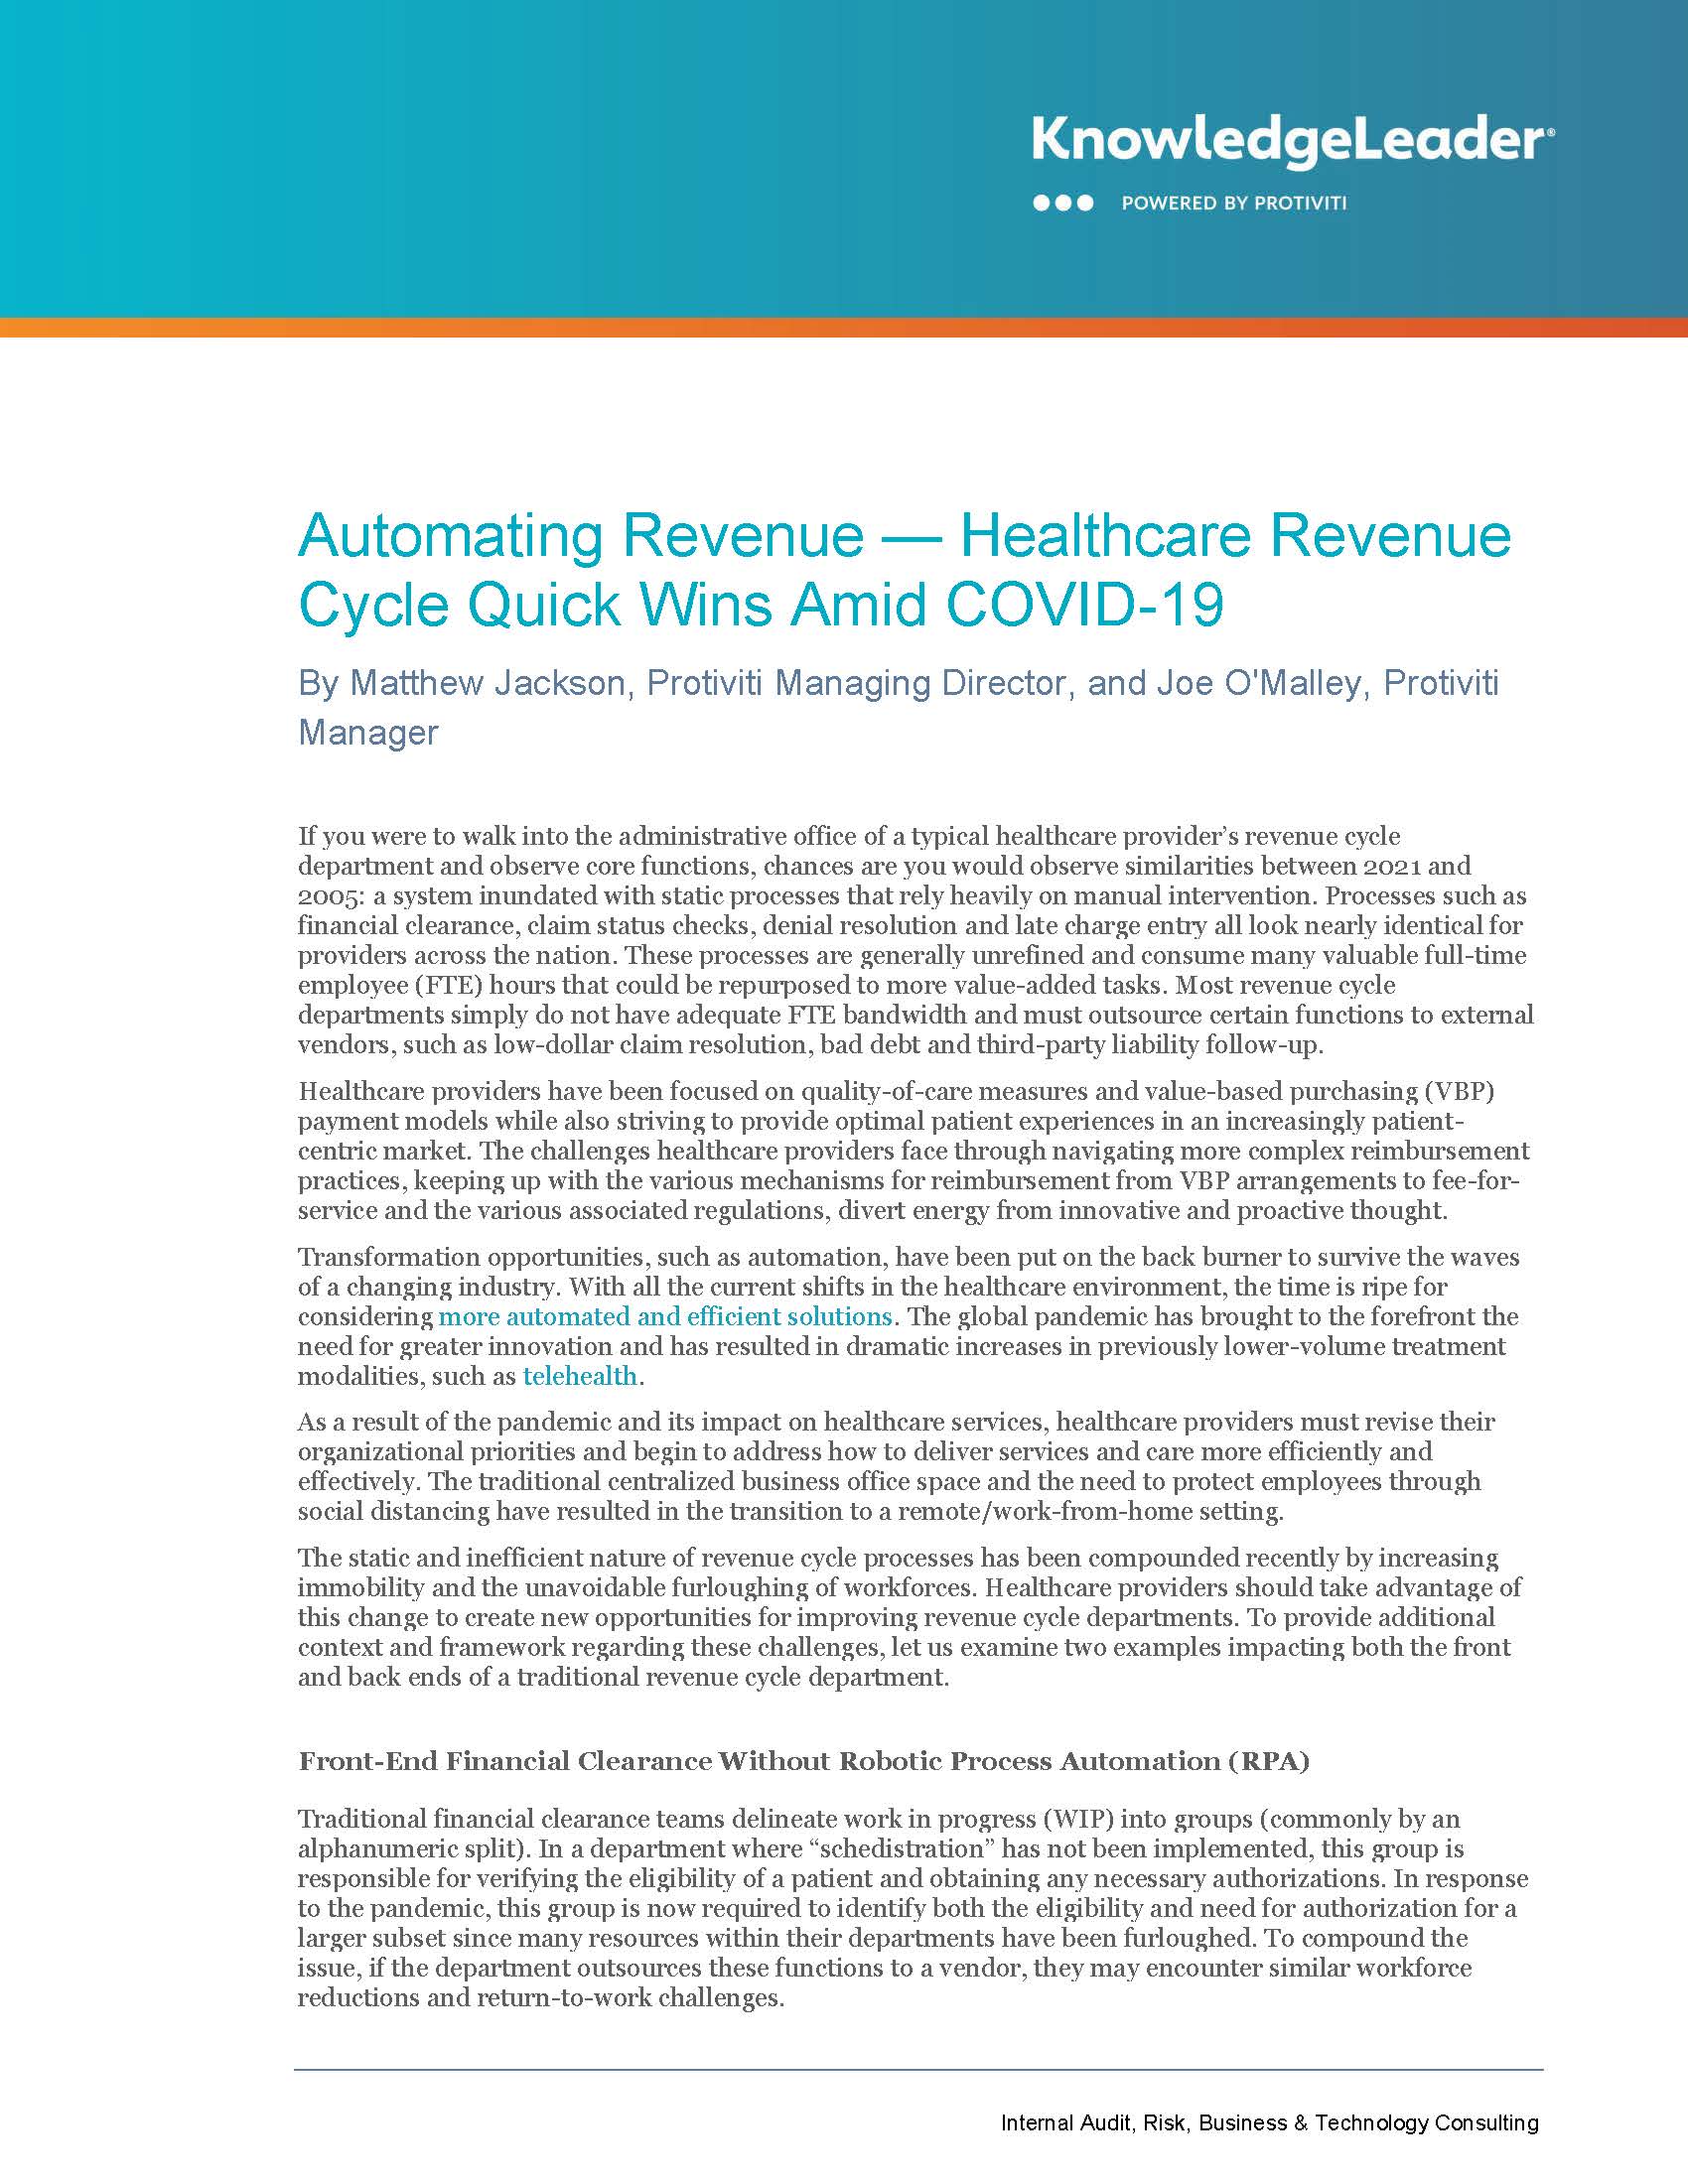 Screenshot of the first page of Automating Revenue — Healthcare Revenue Cycle Quick Wins Amid COVID-19